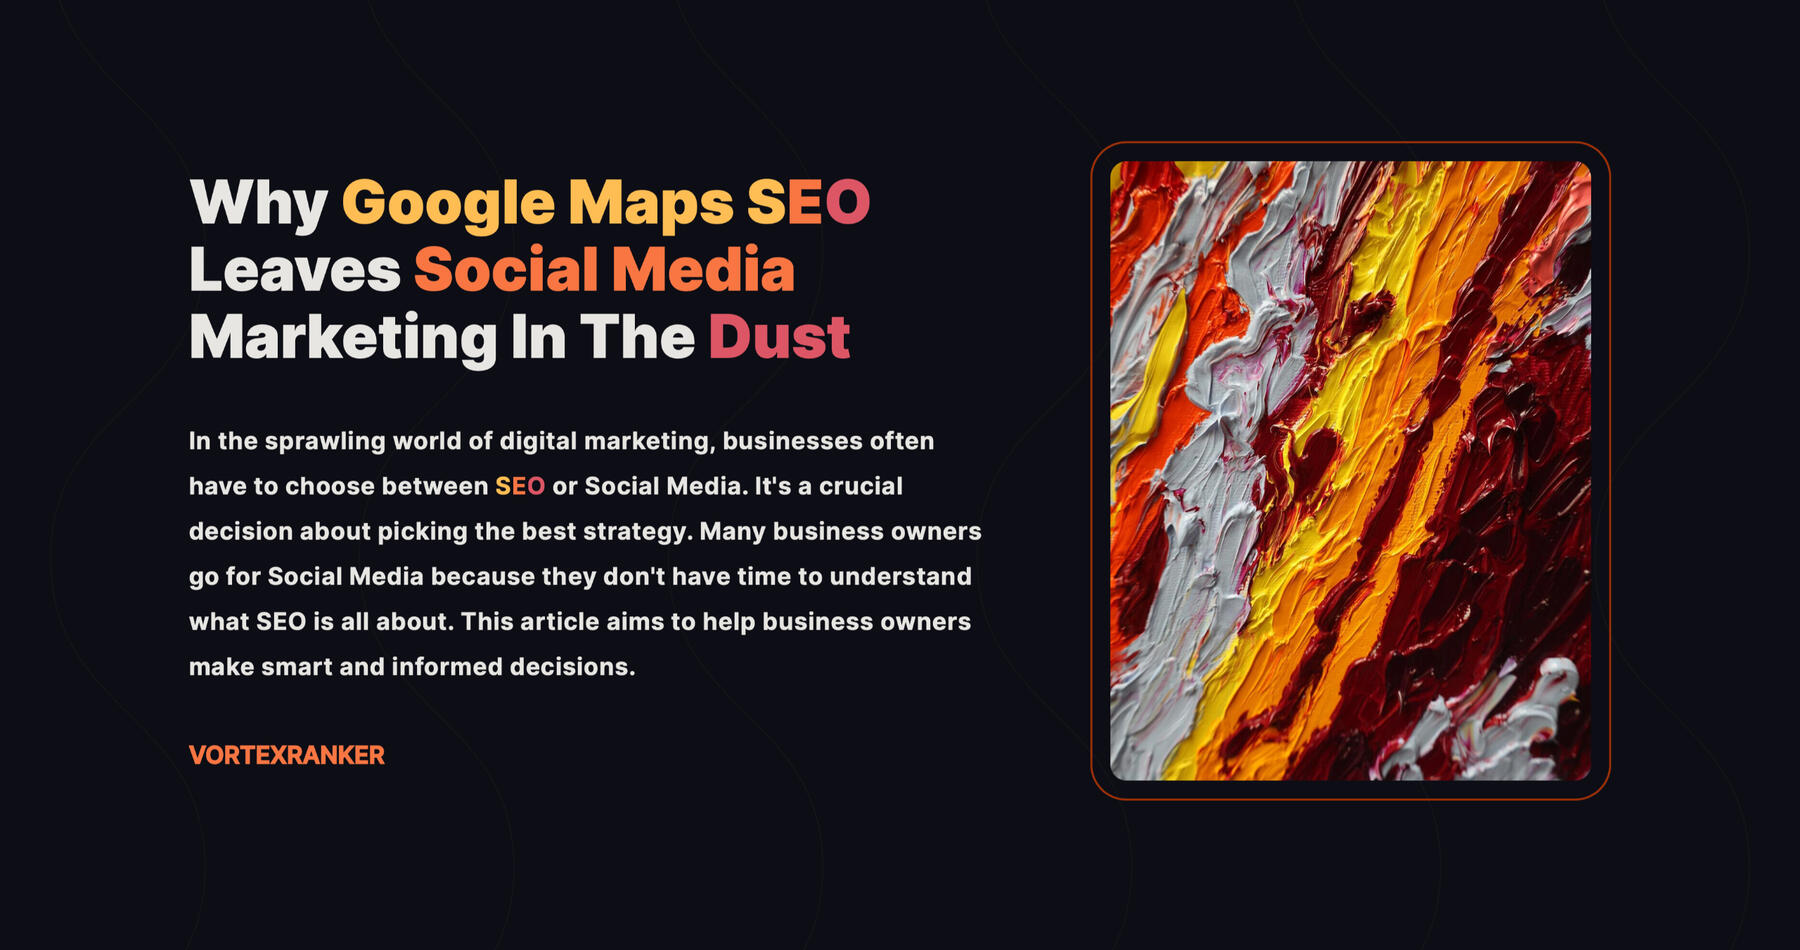 a blog article on why google maps SEO leaves social media marketing in the dust